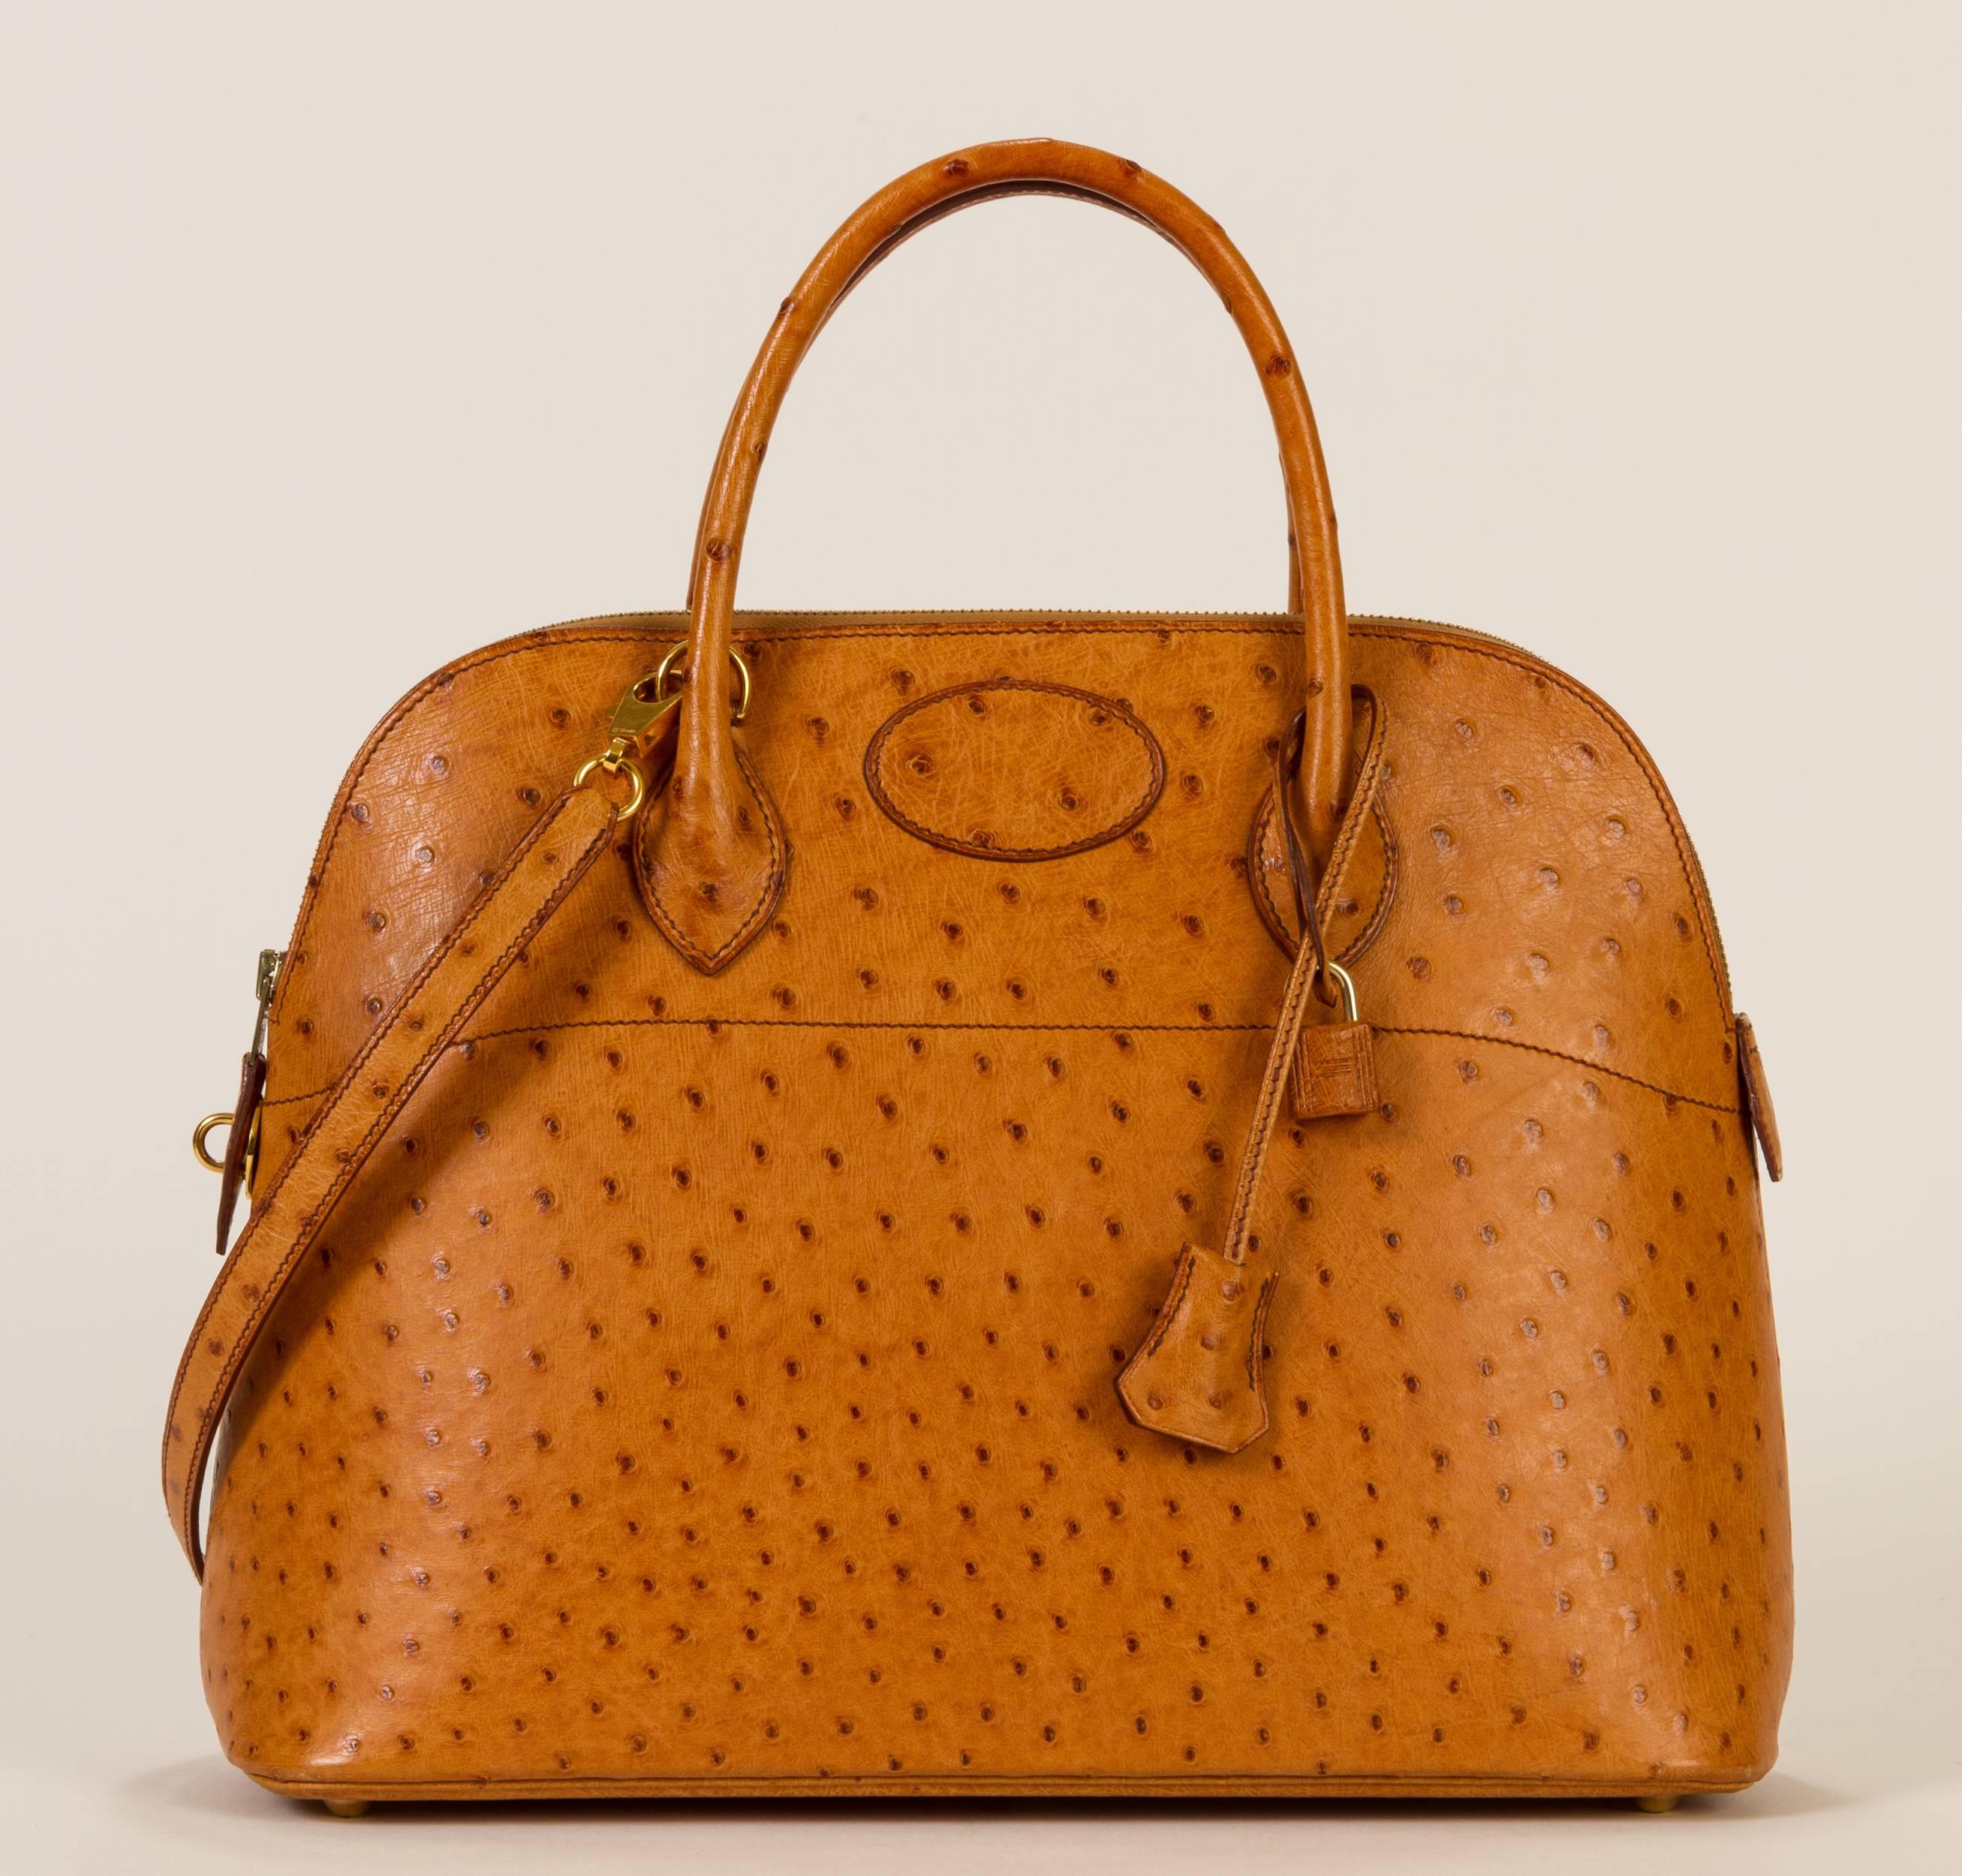 Hermès chestnut 35cm ostrich Bolide bag. Gold hardware. Comes in duster, with lock, key and optional chain strap. Leather interior with pocket. Comes with box. Date stamped circled Z for 1996. Handle drop, 4